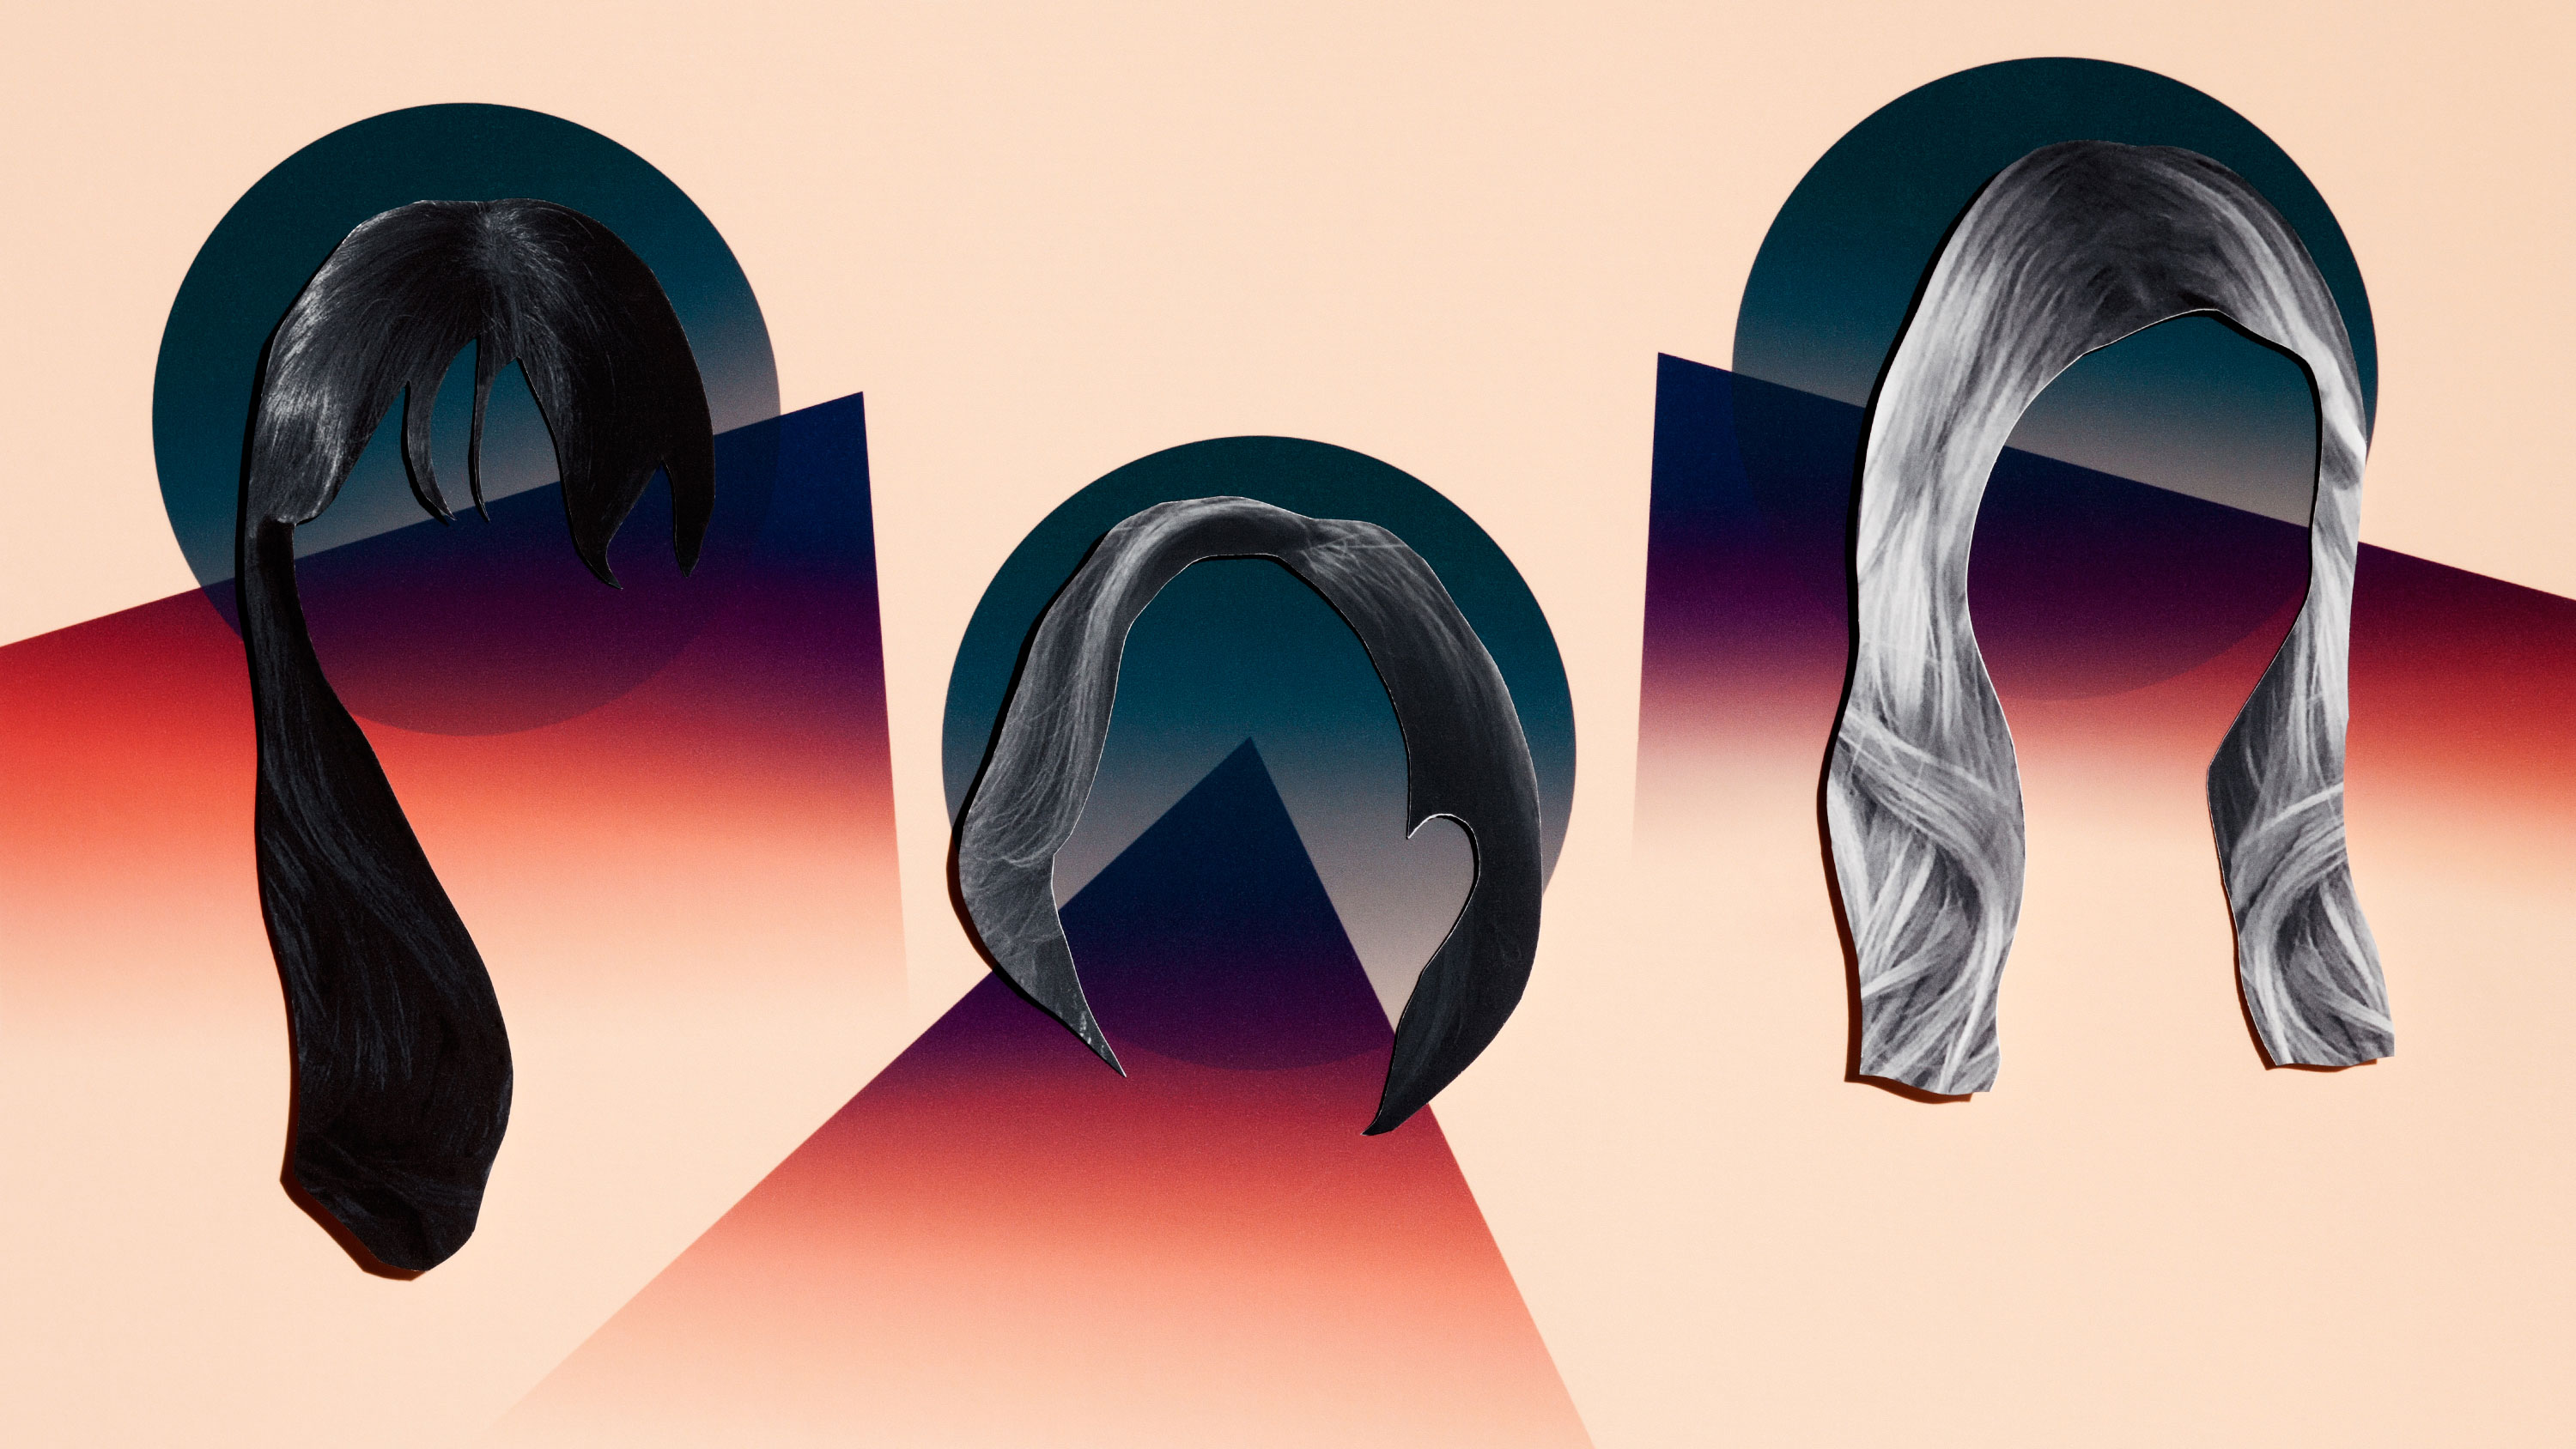 conceptual illustration of 3 women's silhouetted faces